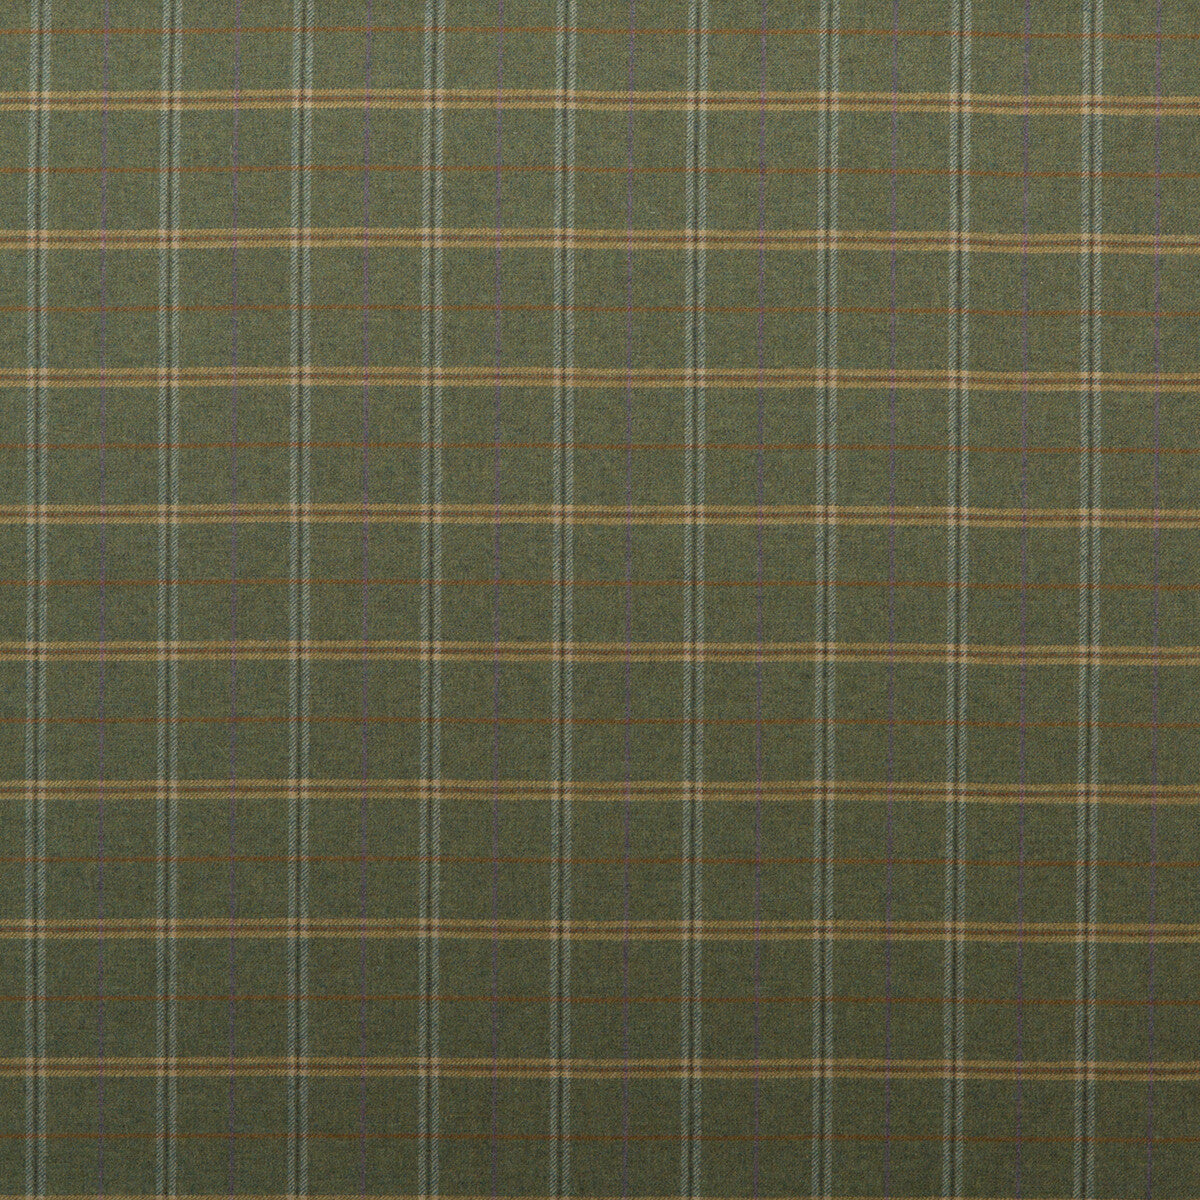 Islay fabric in forest color - pattern FD700.R102.0 - by Mulberry in the Bohemian Romance collection